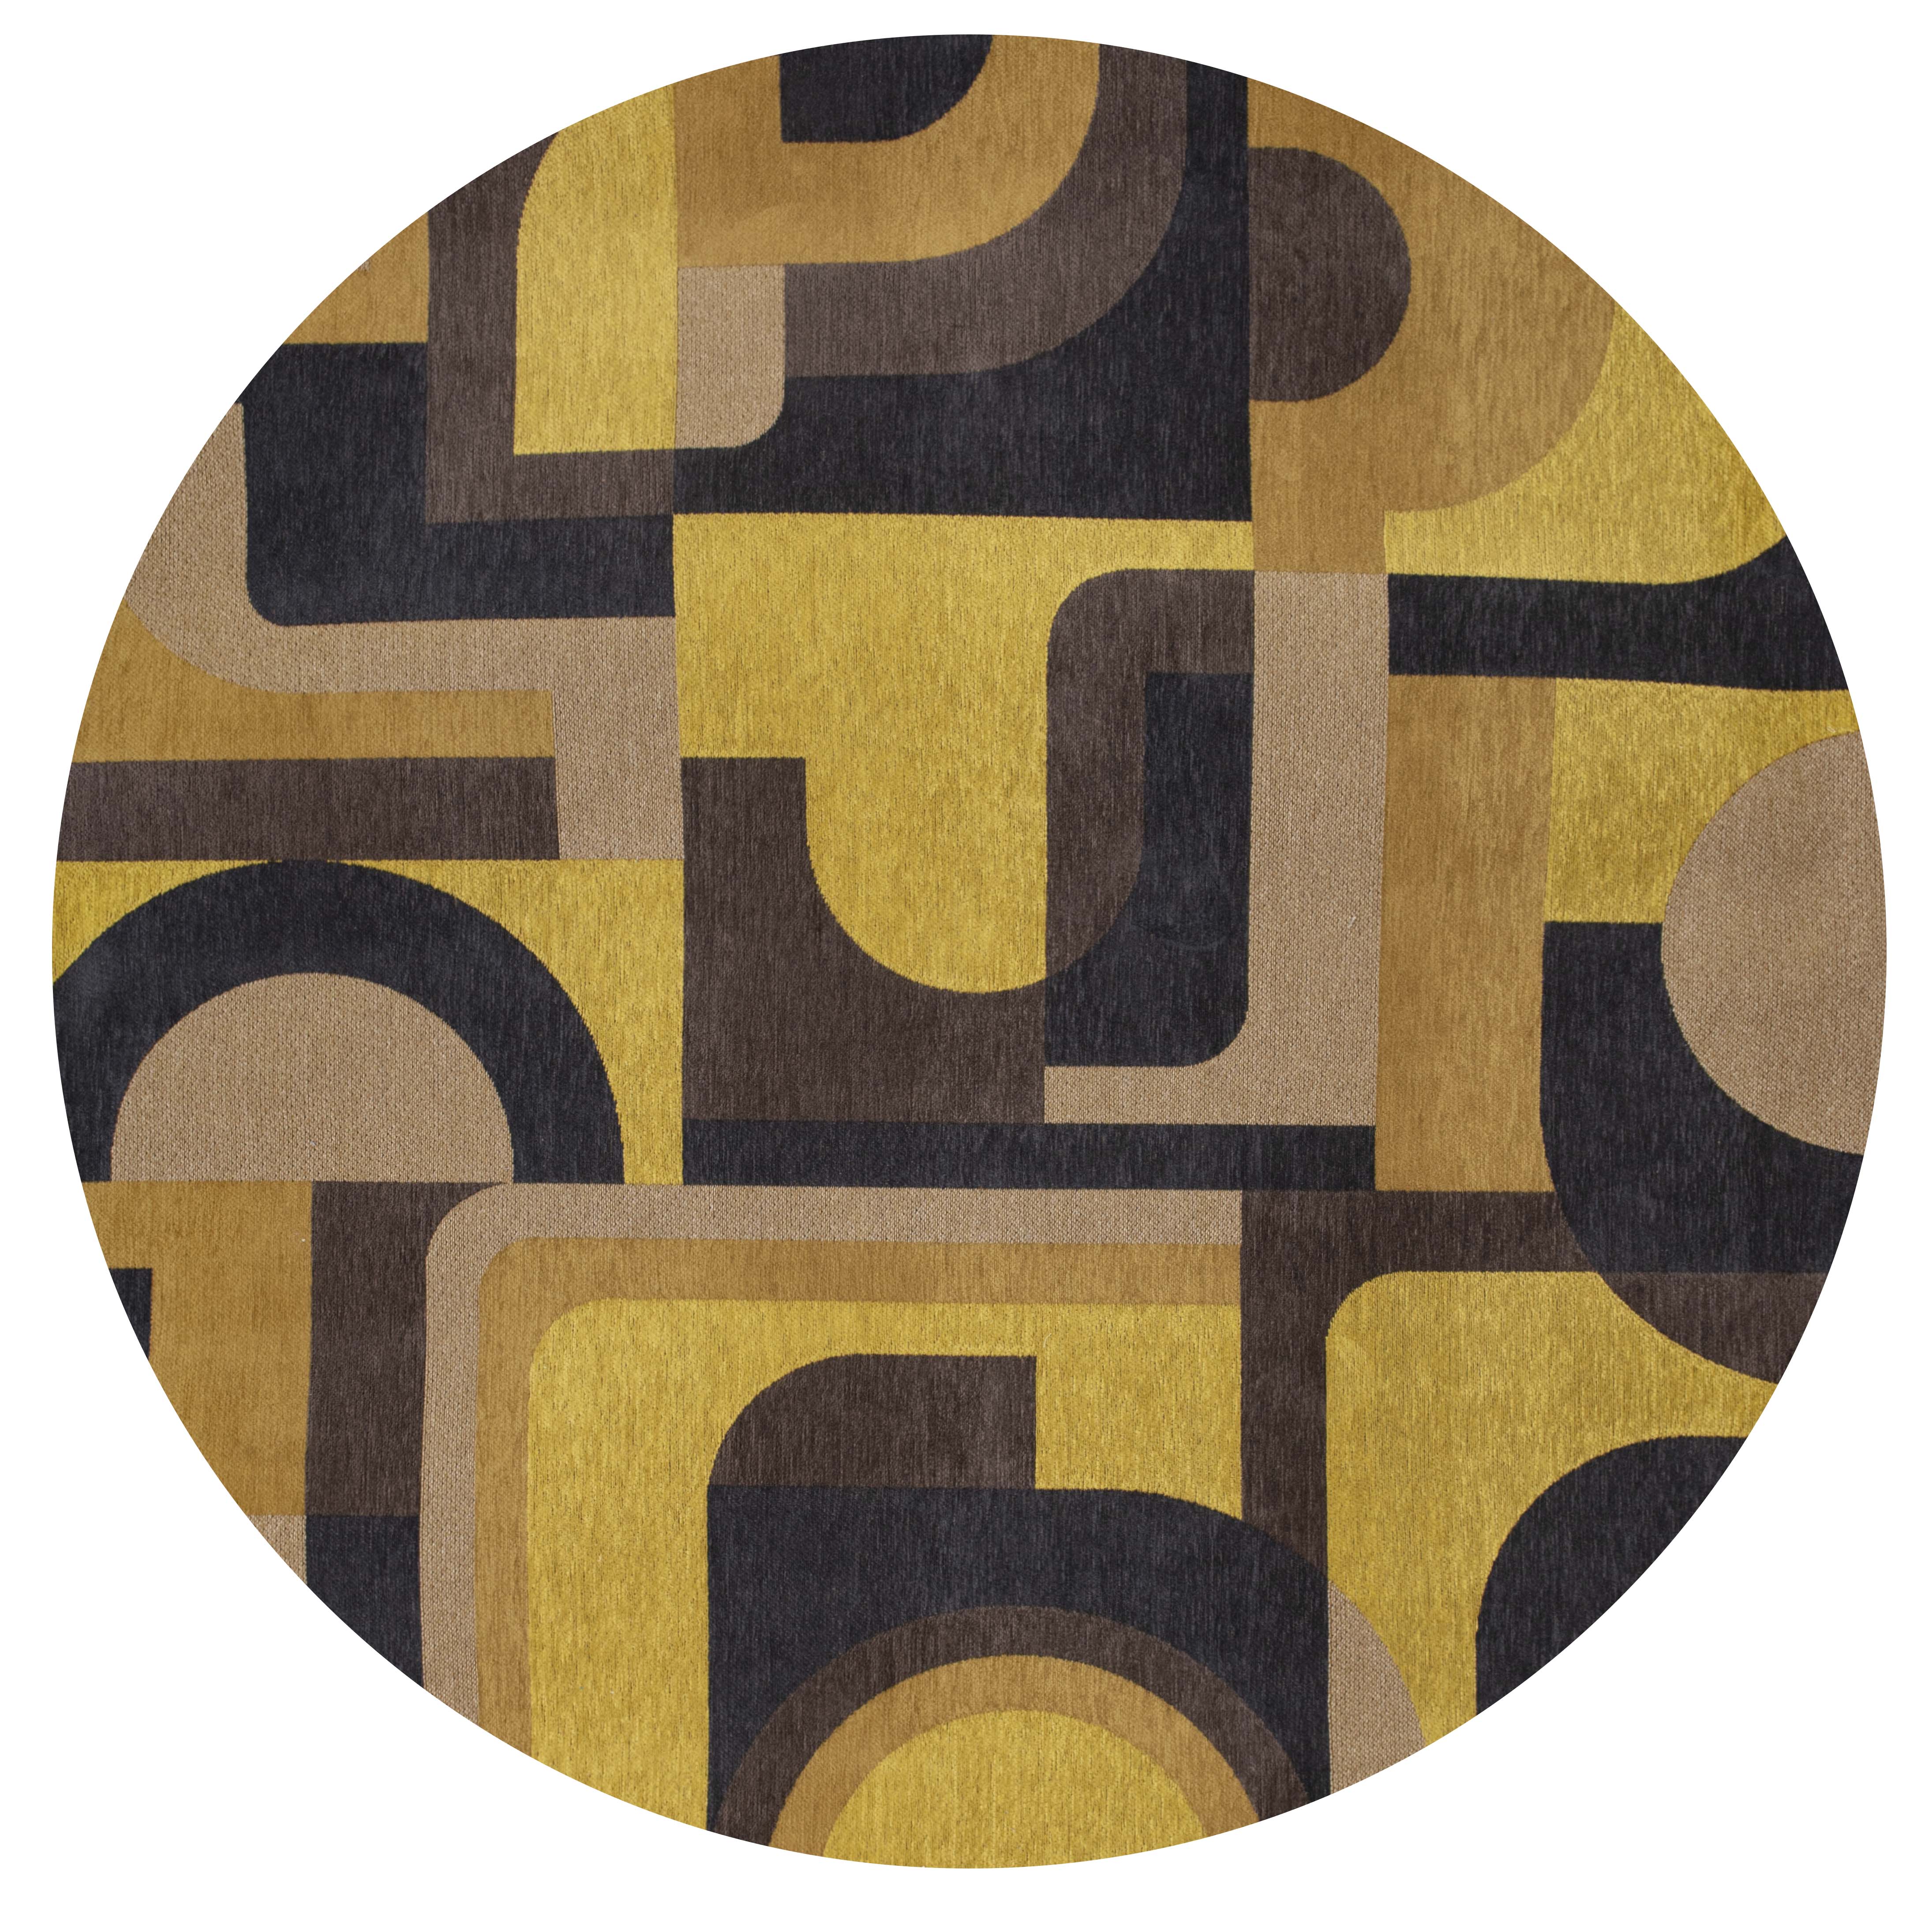 Circle flatweave area rug with retro pattern in yellow, navy and brown